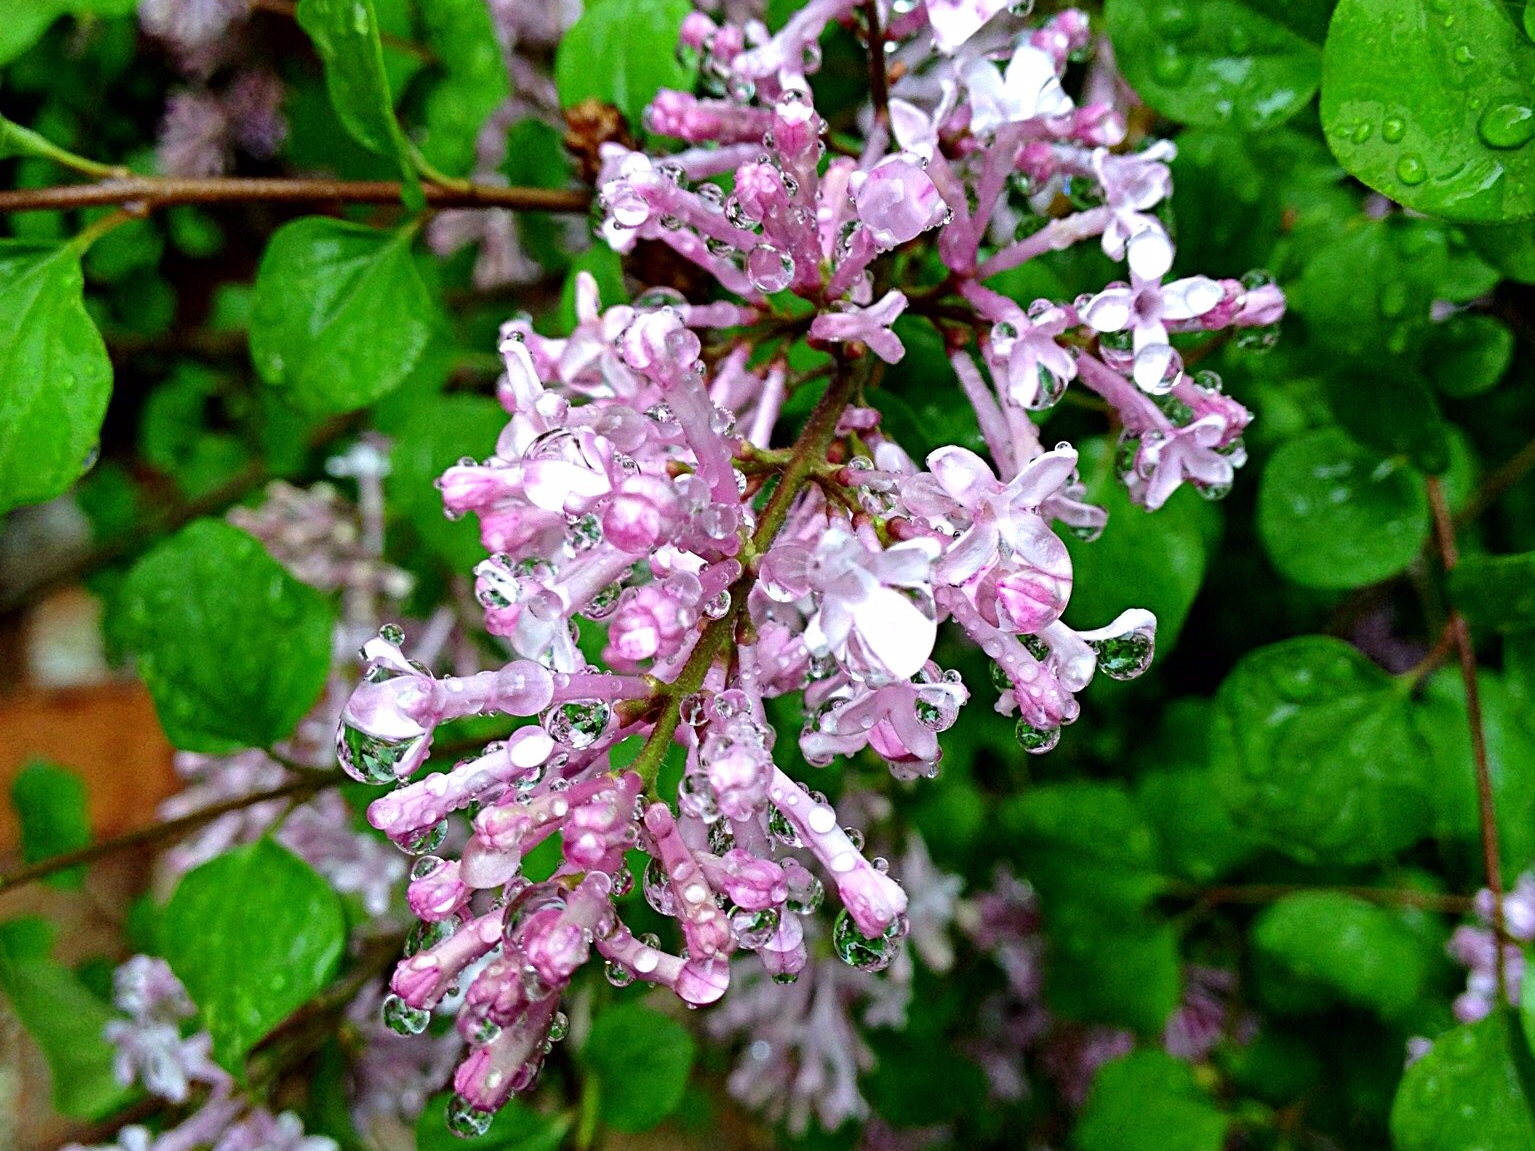 Korean lilac blooms in May and gives off a sweet spicy scent